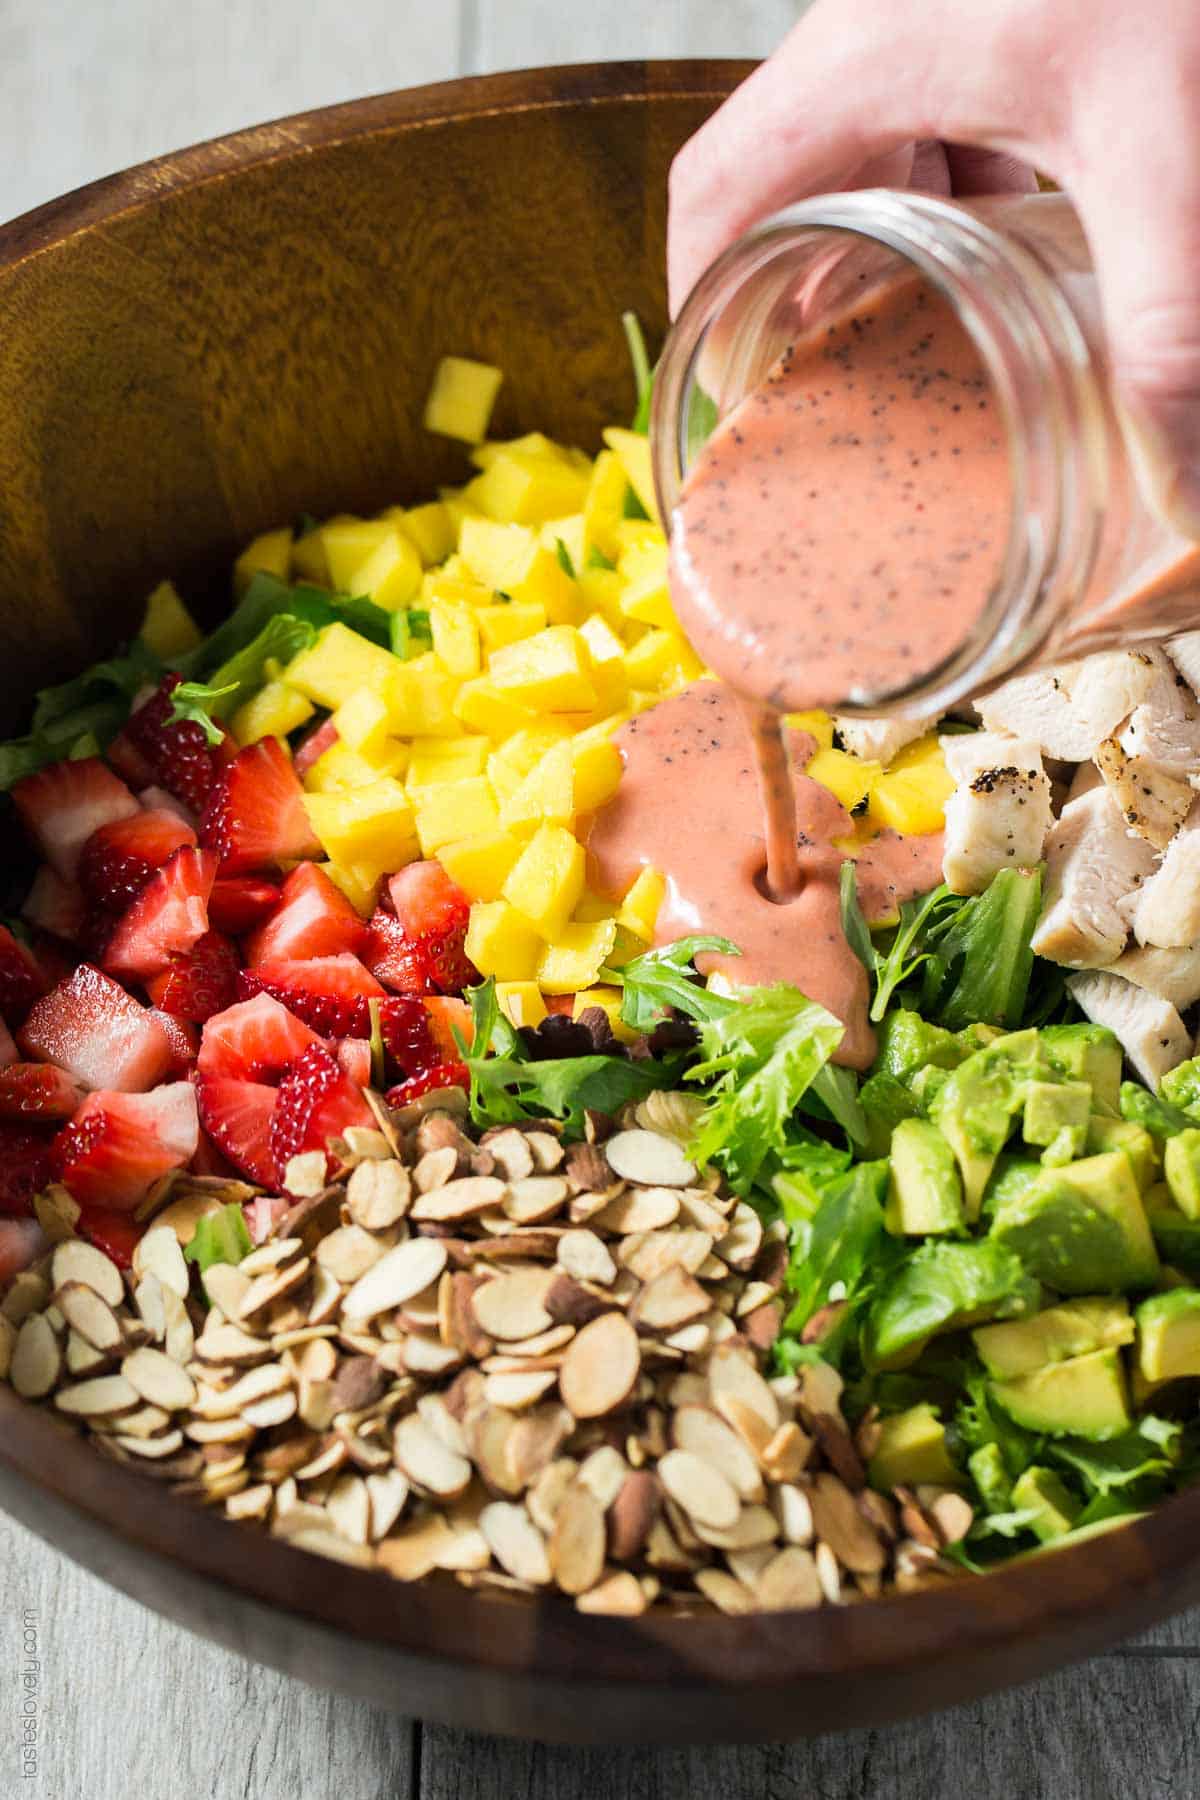 Paleo Strawberry Mango Salad with Chicken - a healthy and delicious paleo, gluten free and dairy free salad for lunch or dinner!